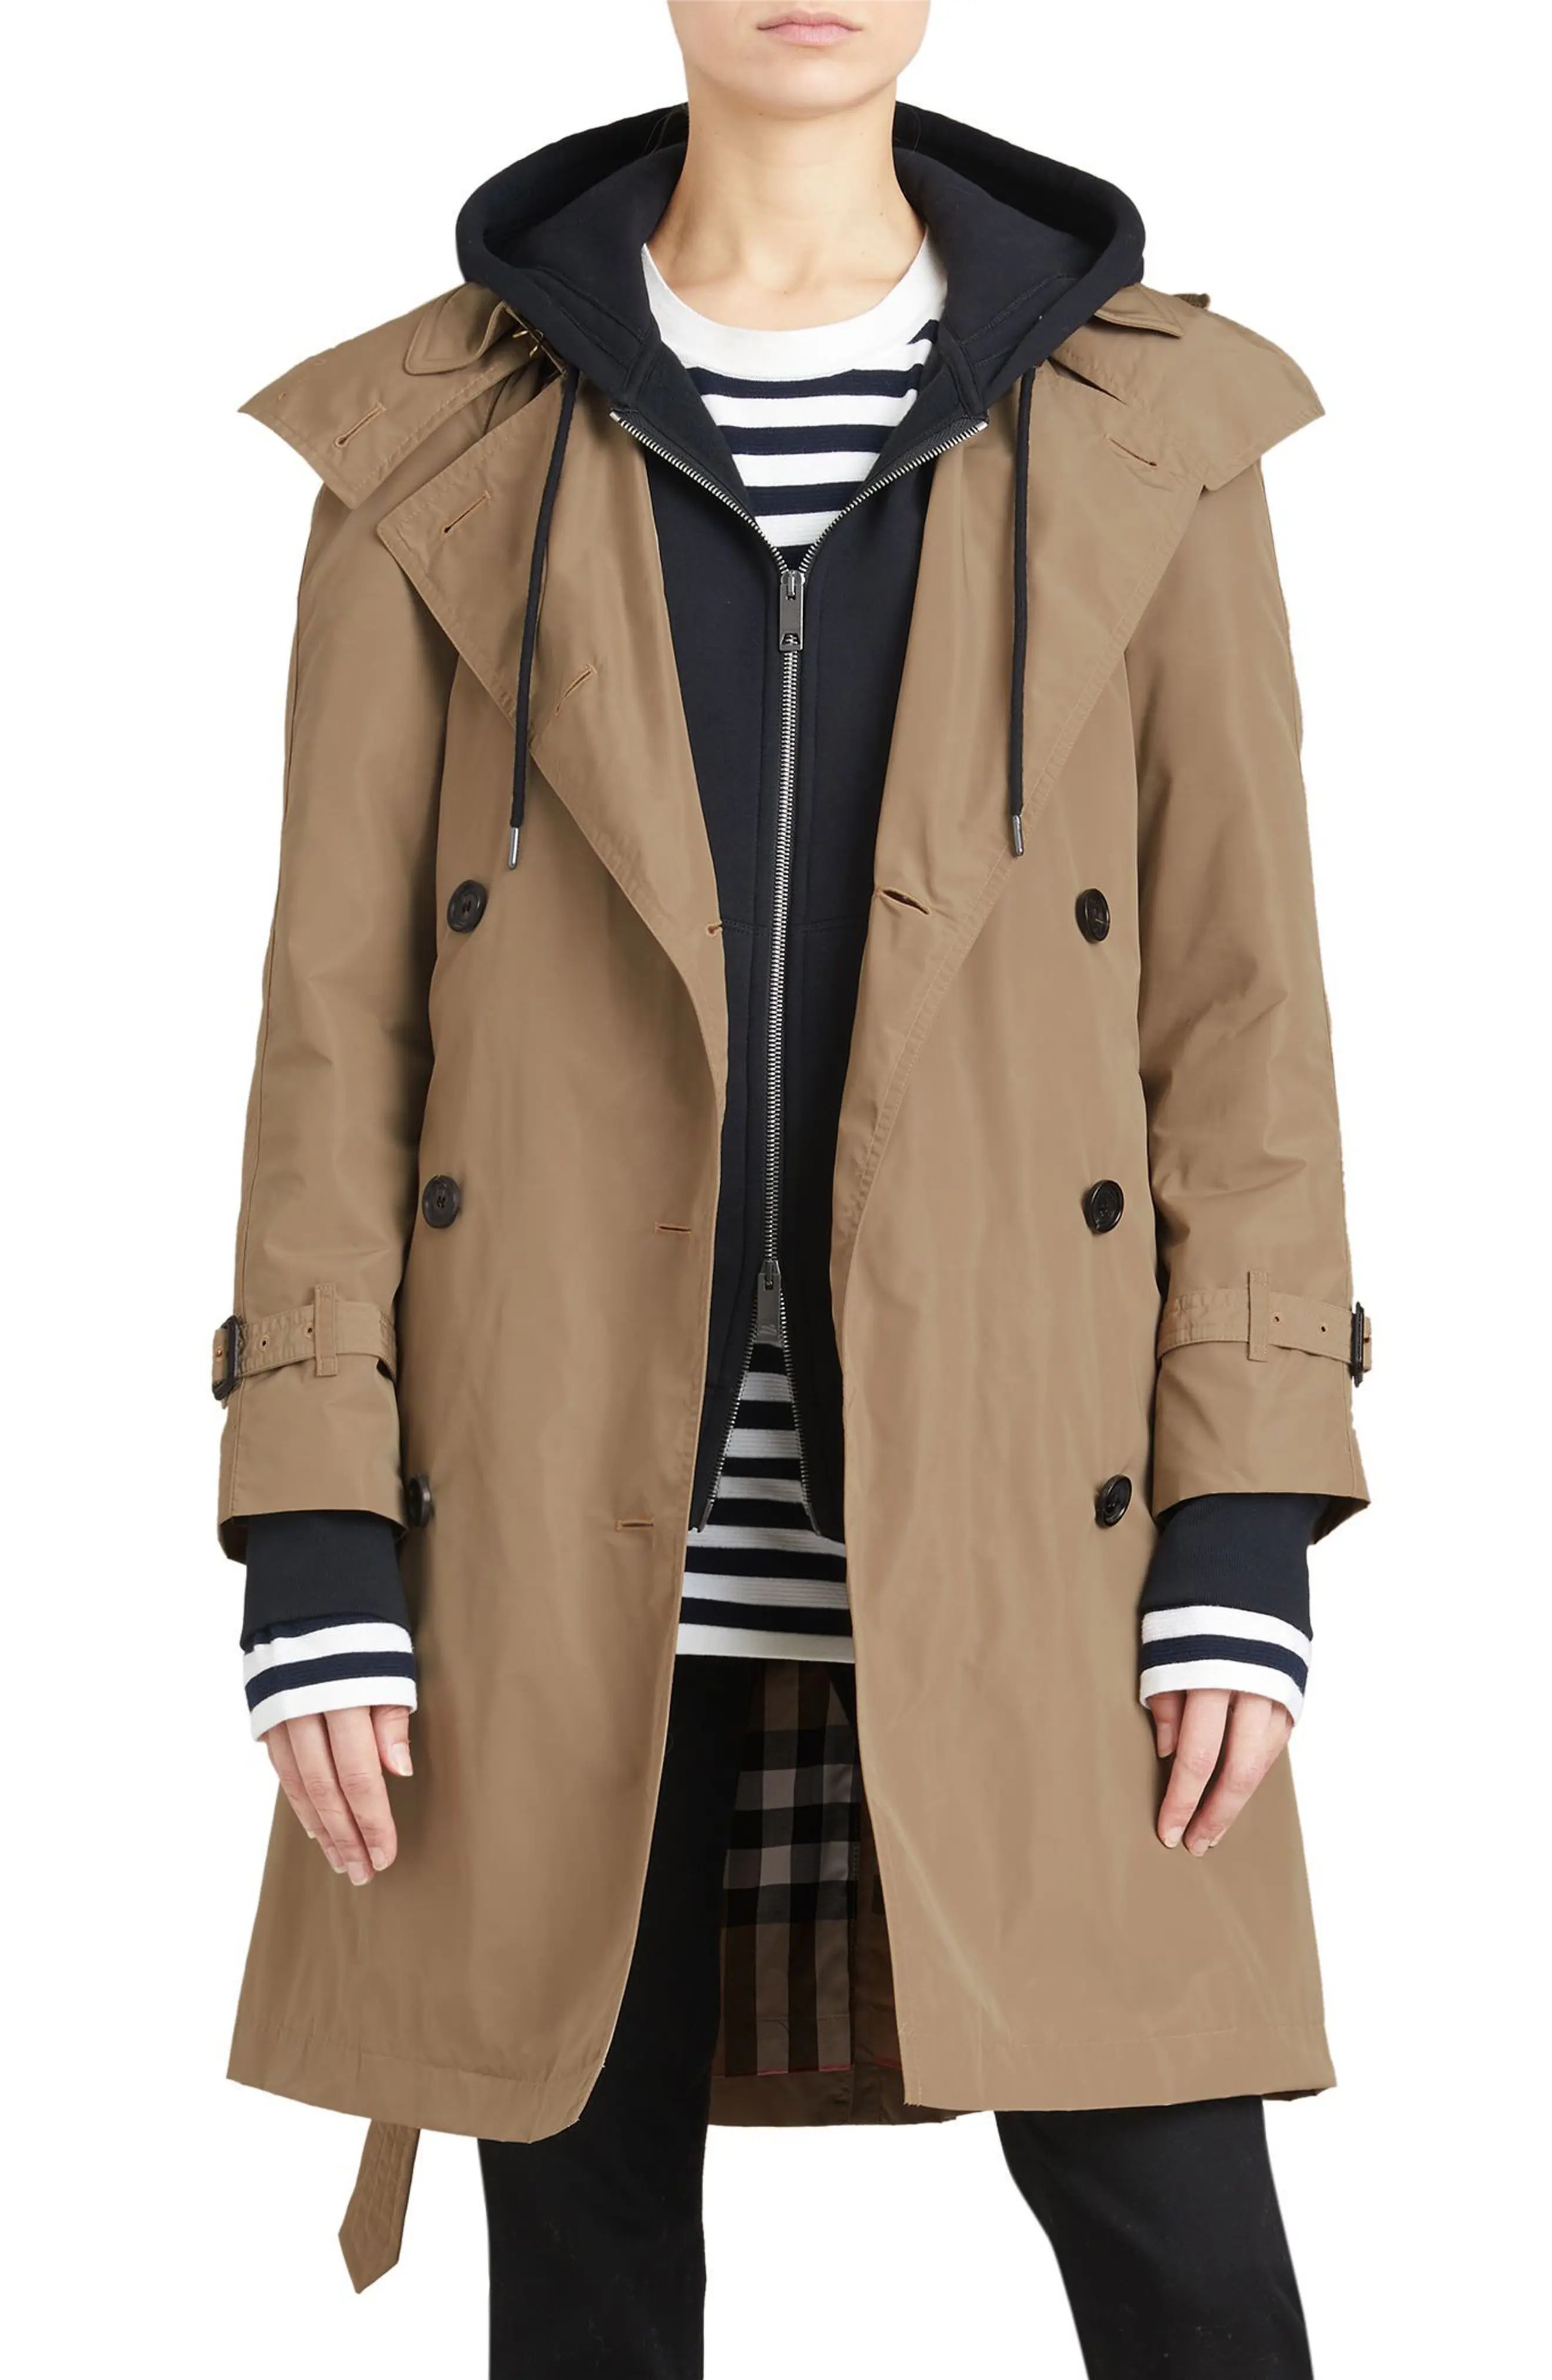 Amberford Taffeta Trench Coat with Detachable Hood | Nordstrom